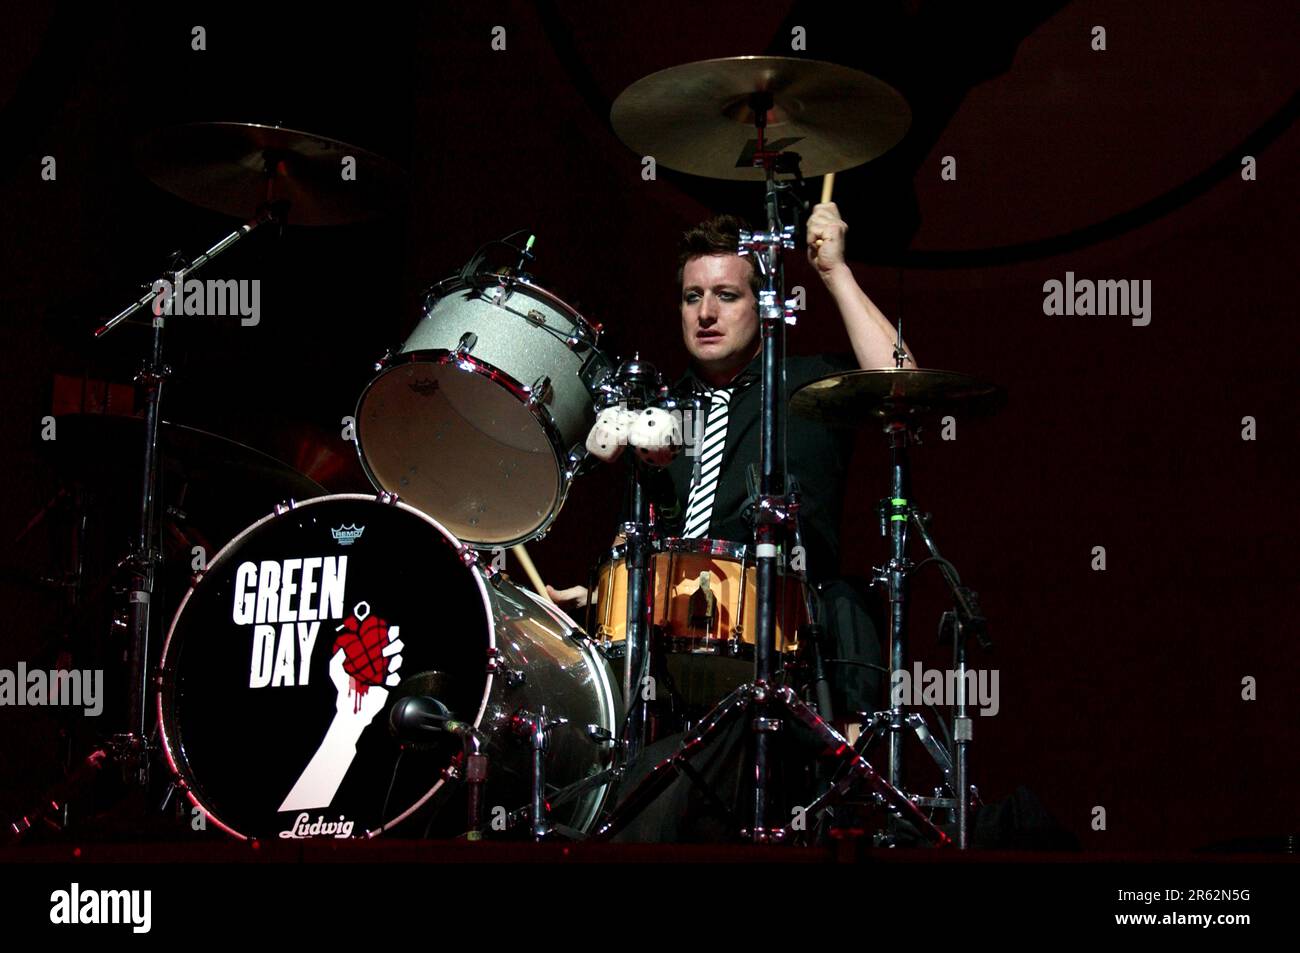 Milan Italy 2005-01-16: Tré Cool drummer of Green Day during live concert at the Forum Assago Stock Photo